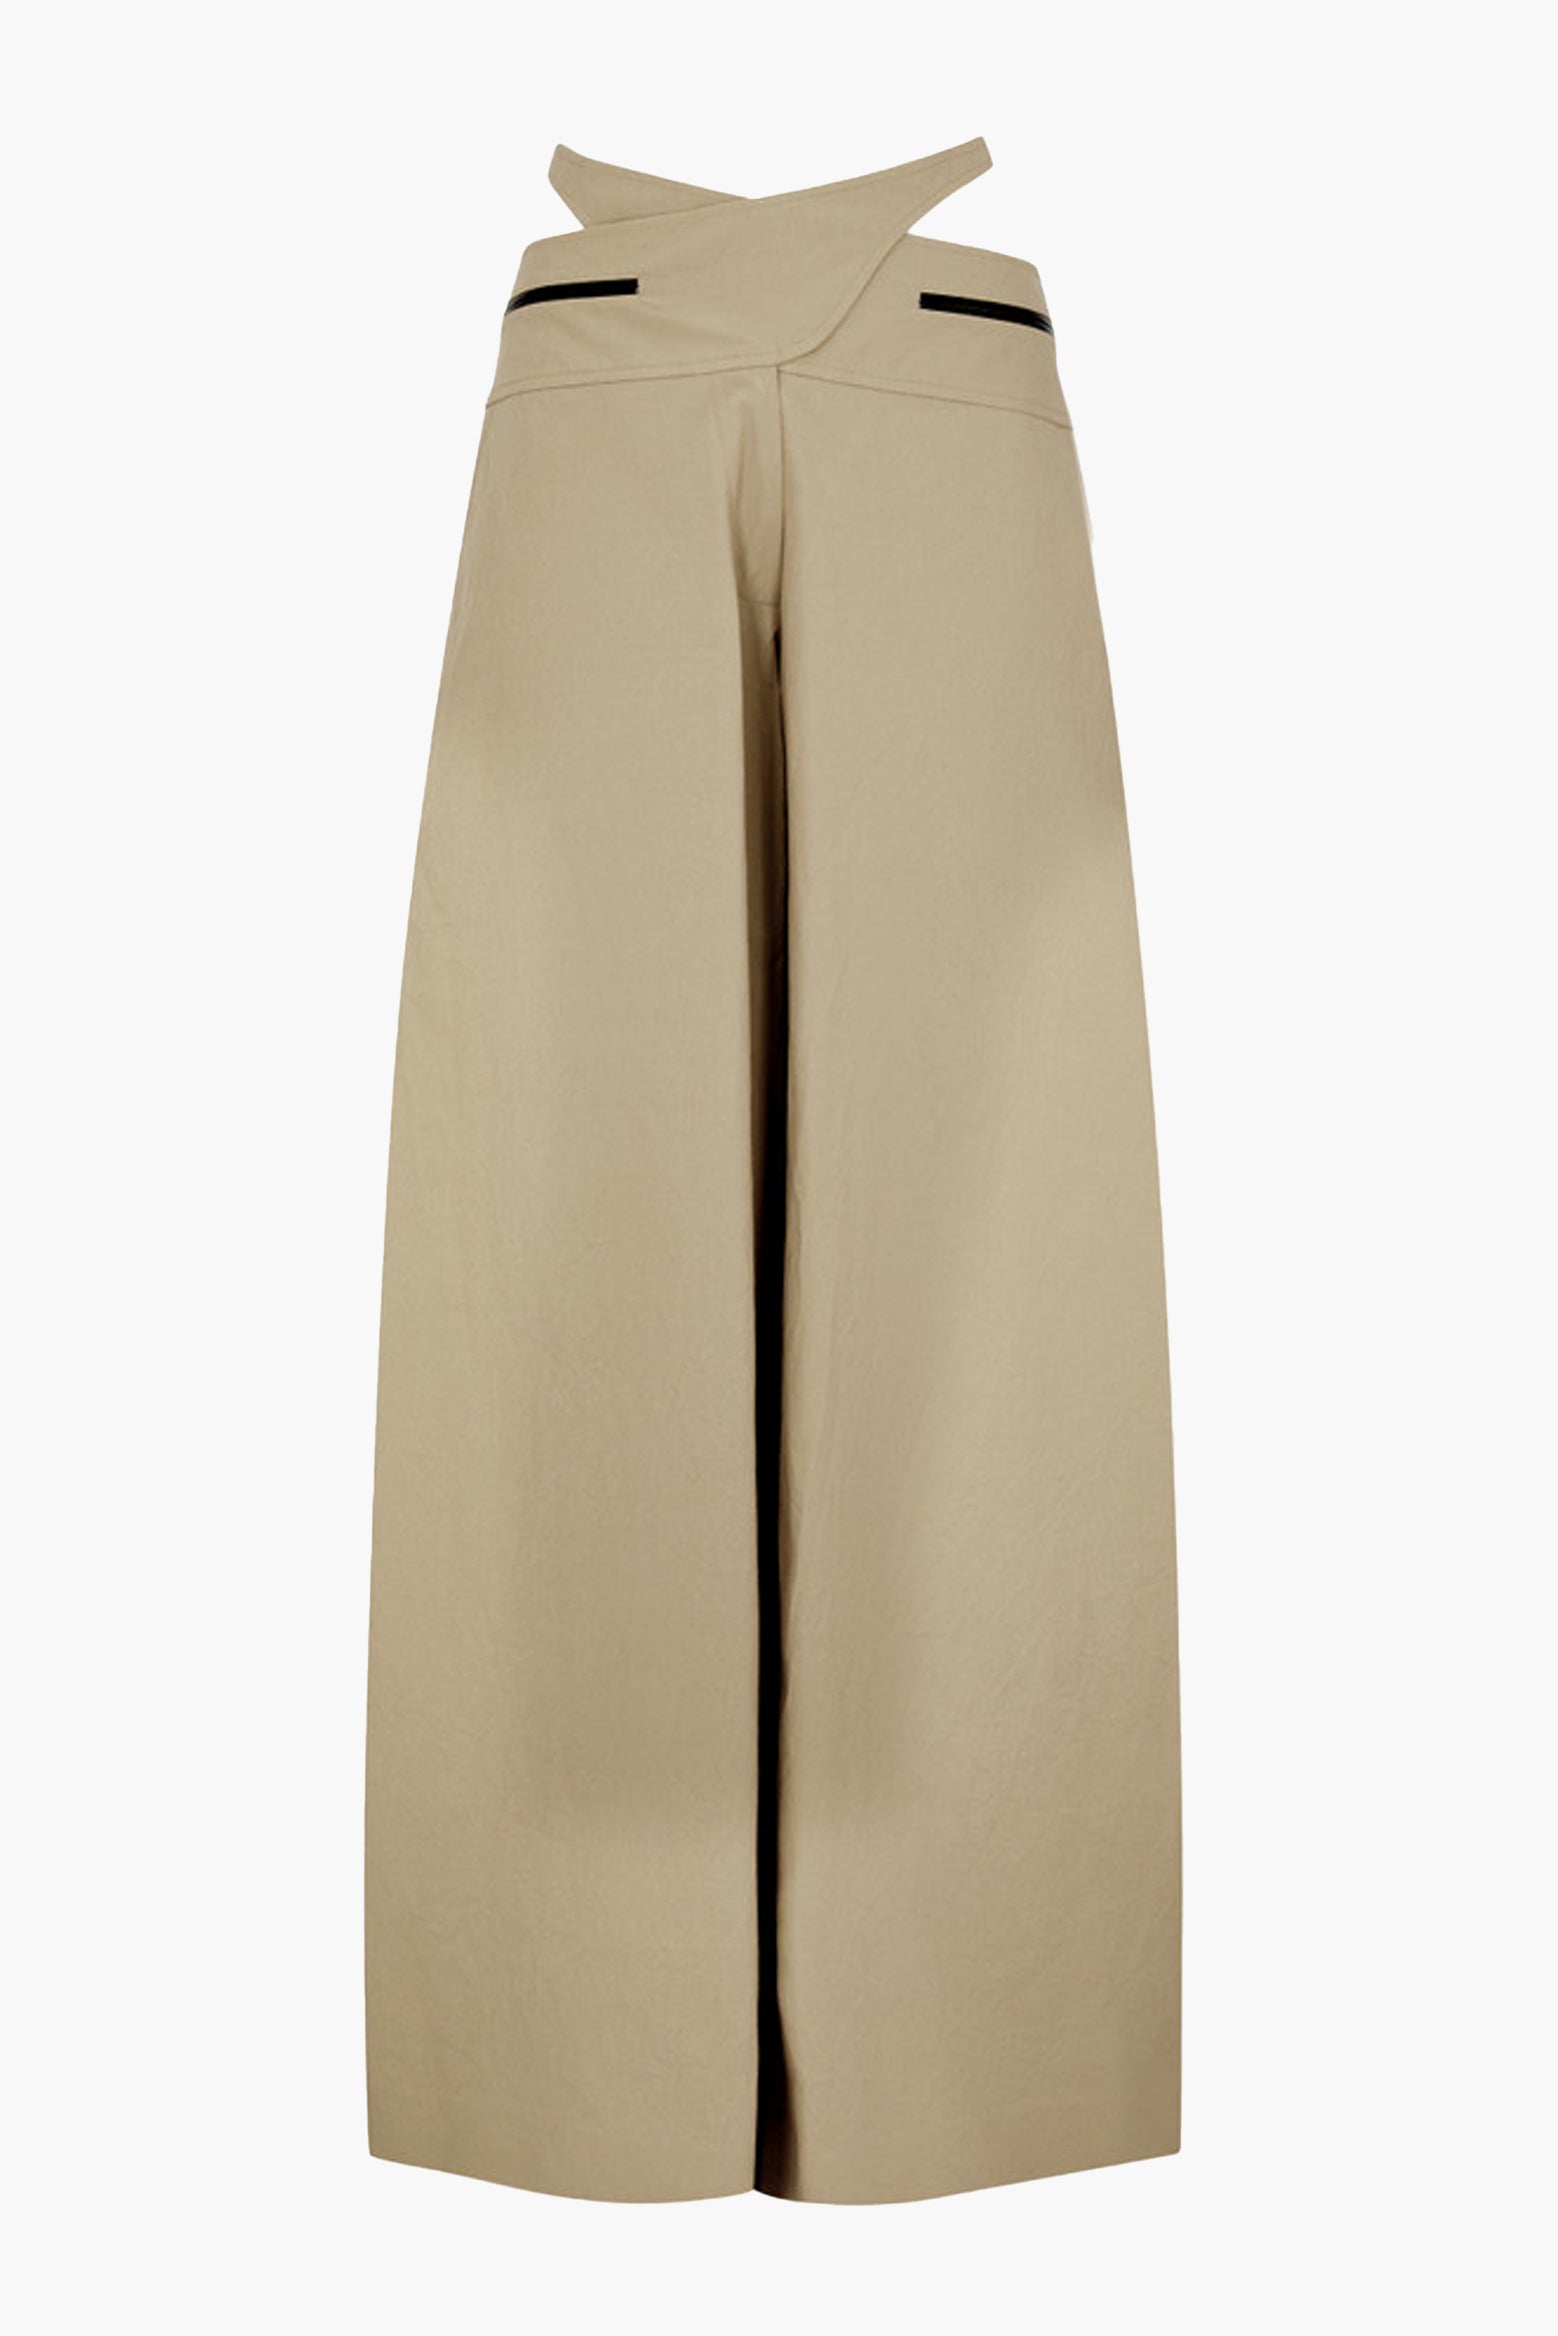 Christopher Esber Mason Bind Trouser in Stone available at The New Trend Australia.